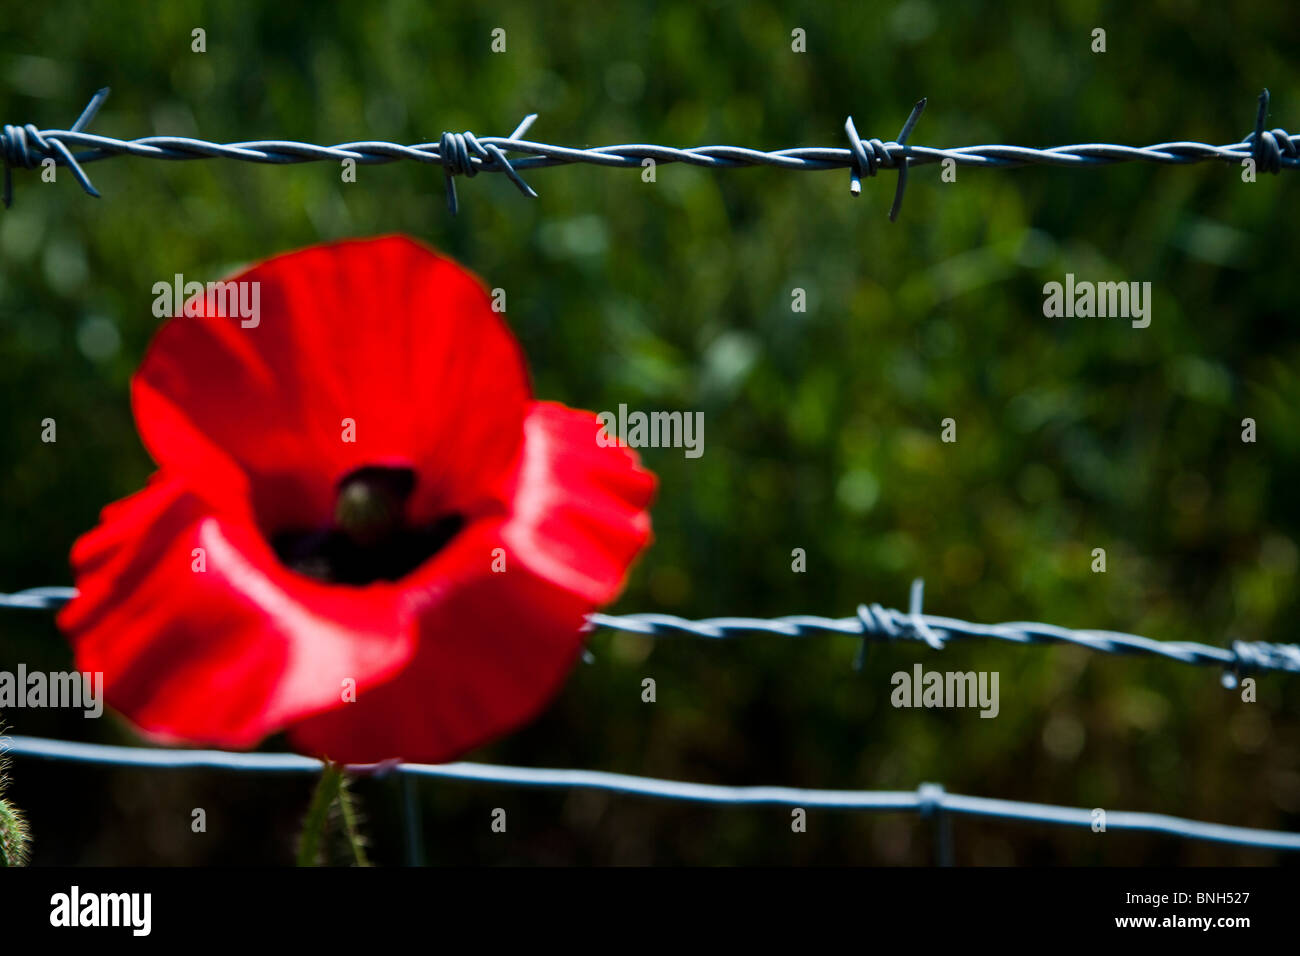 British Red poppies in field Banque D'Images